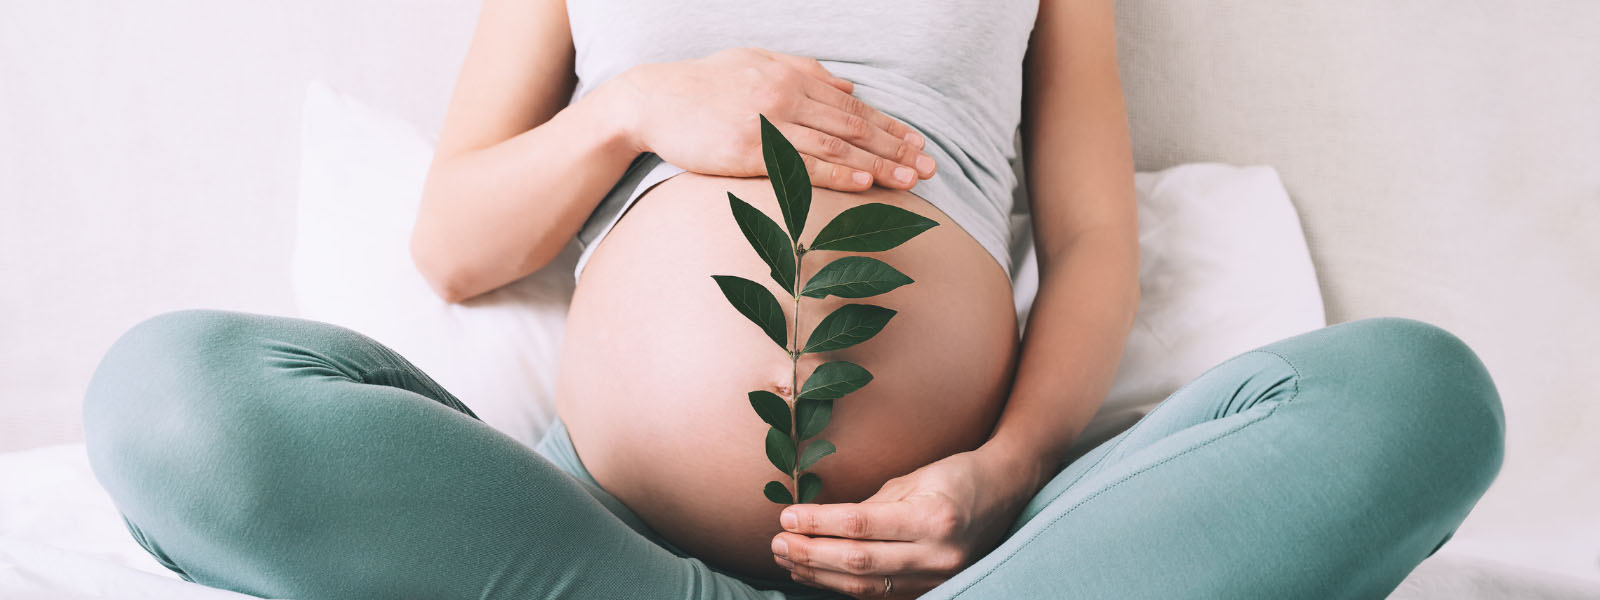 pregnant woman holds green sprout plant near her belly